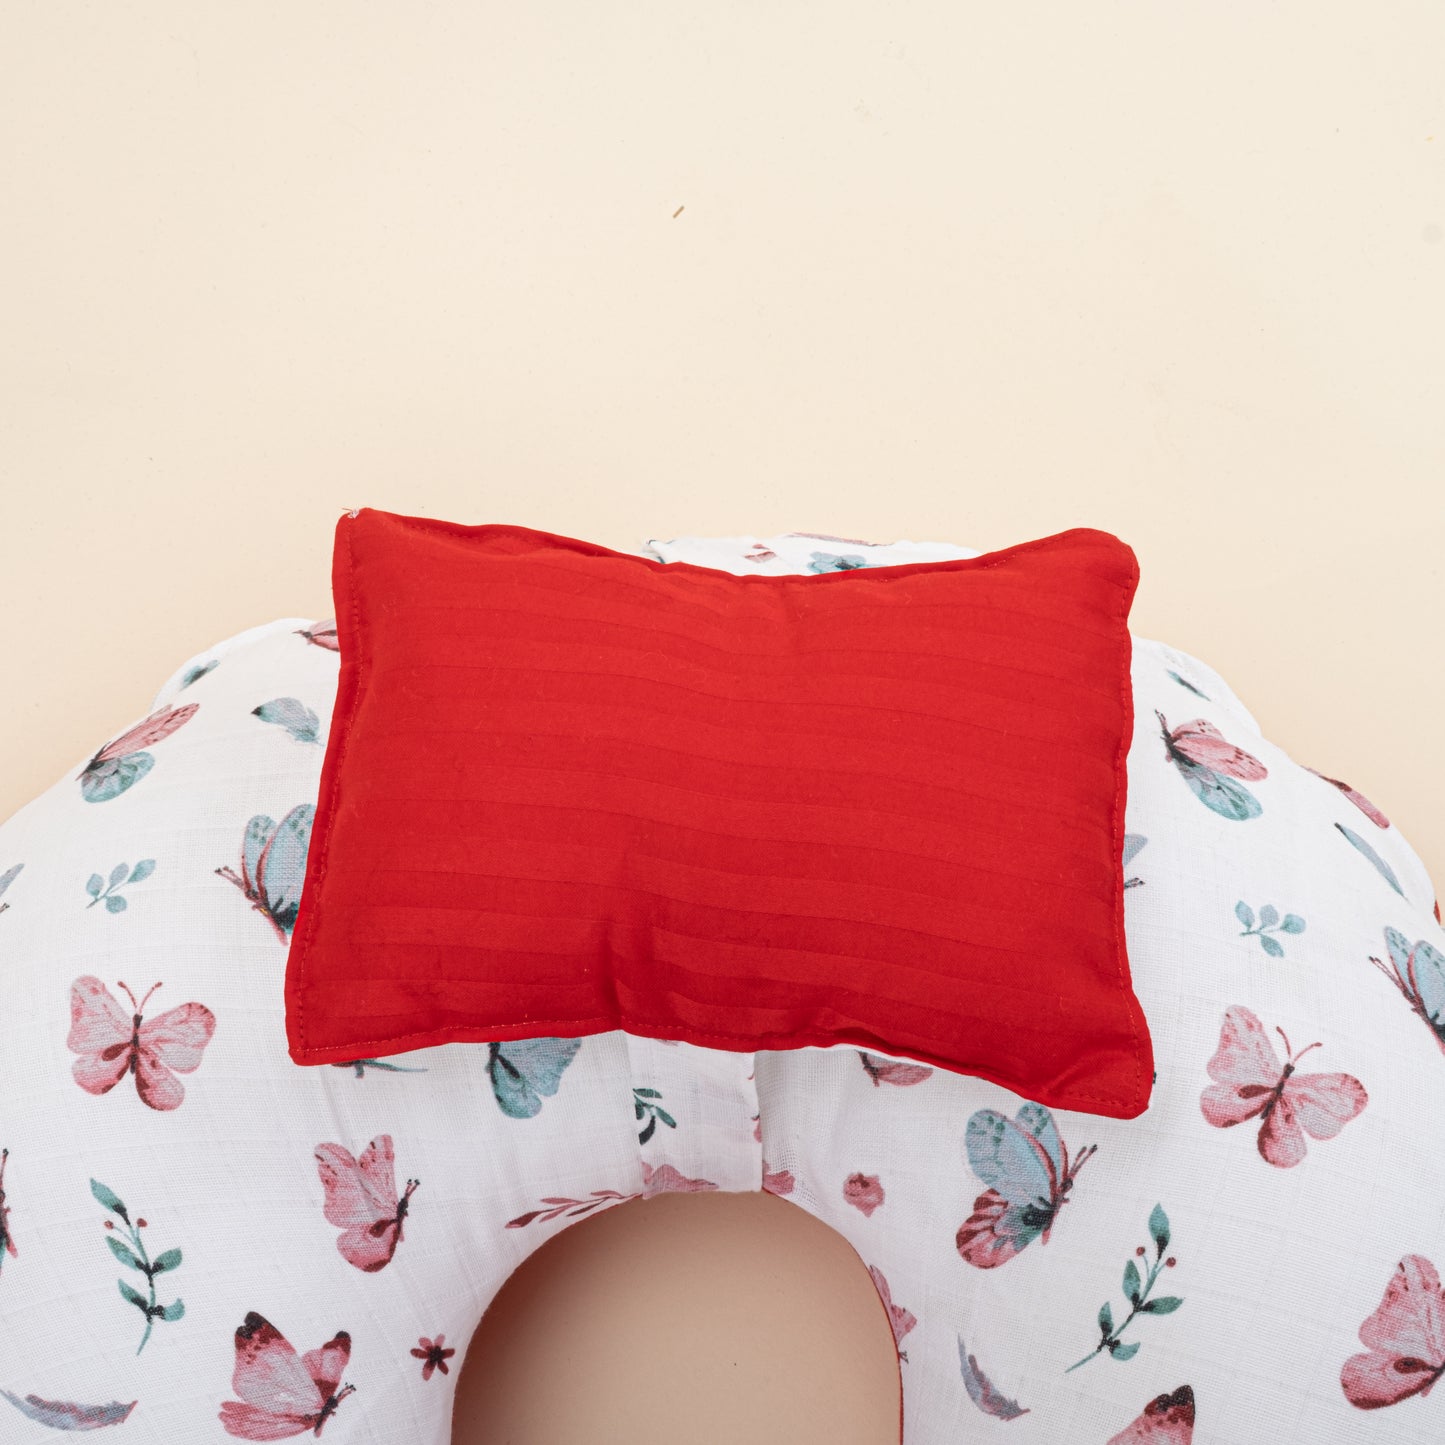 Breastfeeding Pillow - Red Satin - Butterfly